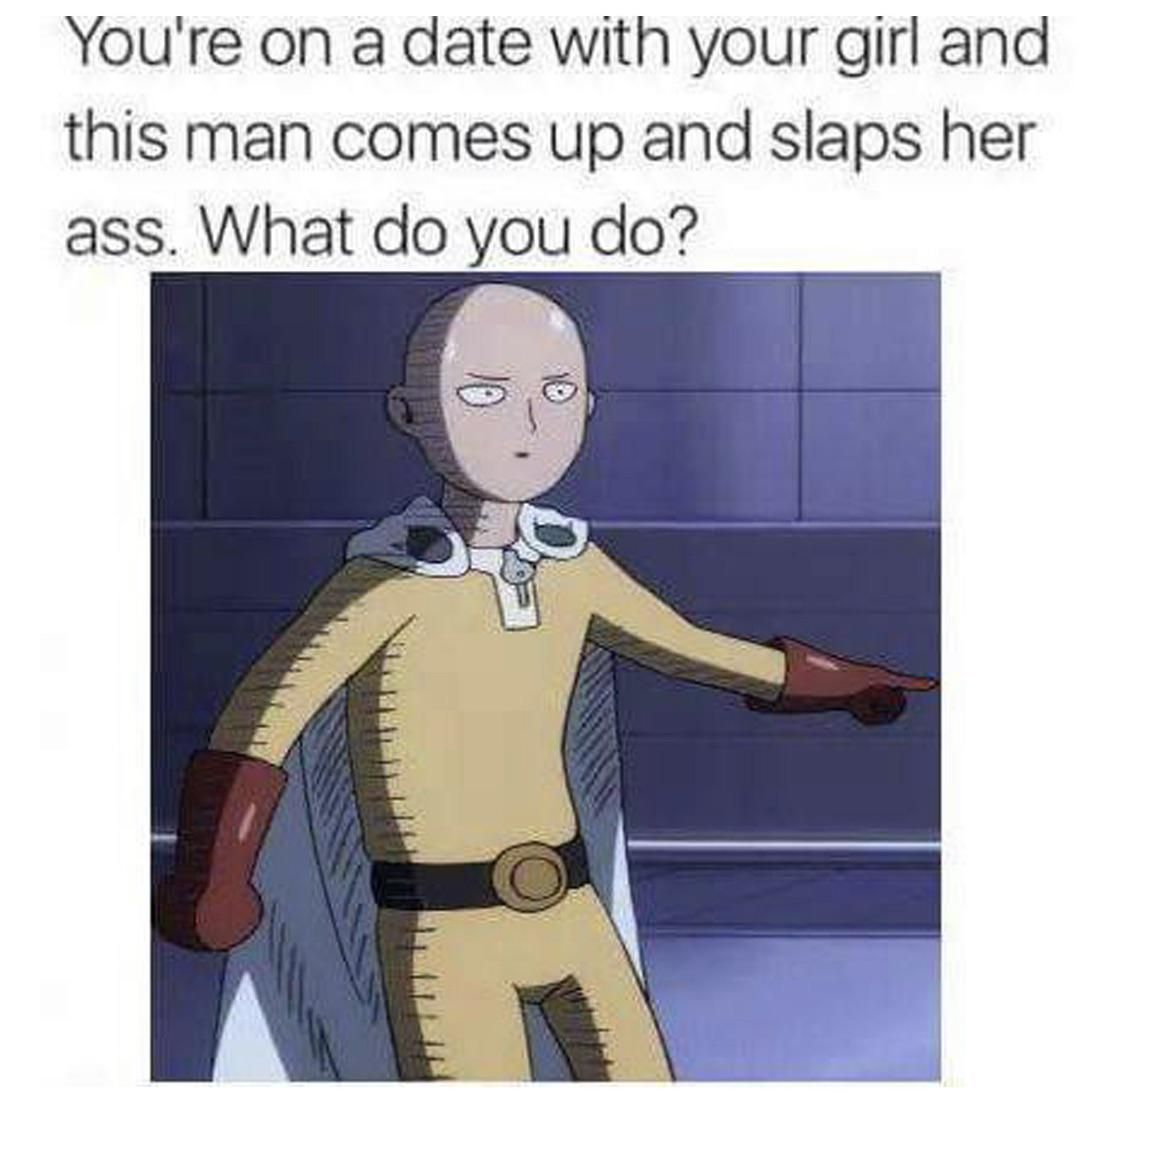 well? what would you do